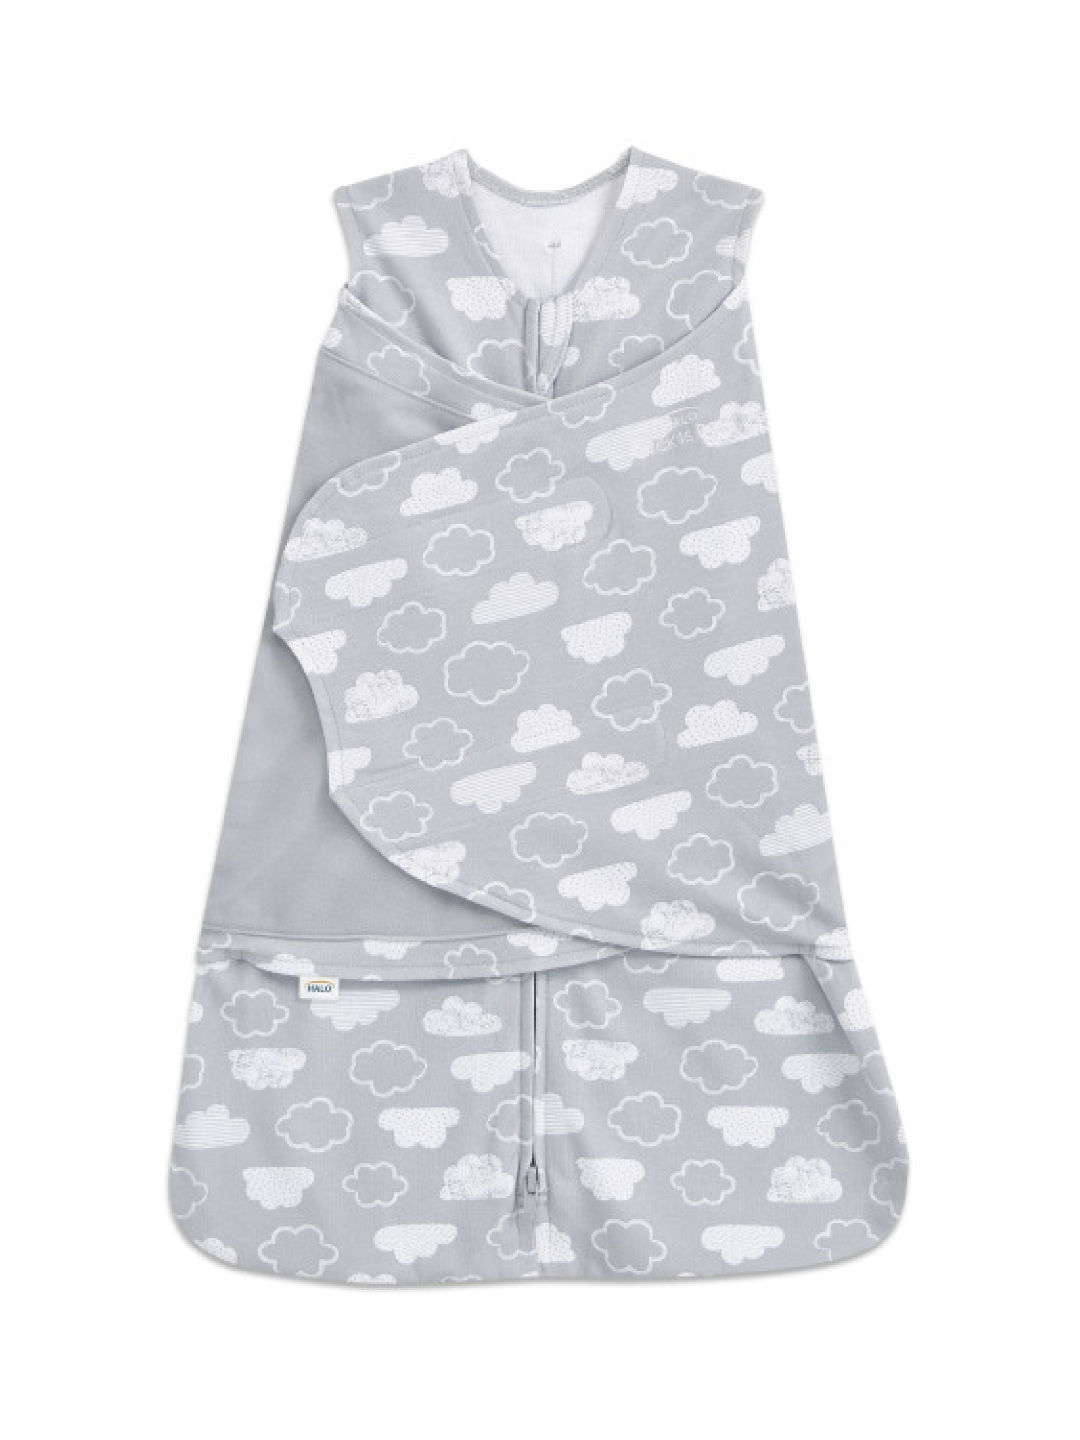 Halo Multi-way Swaddle (Clouds)